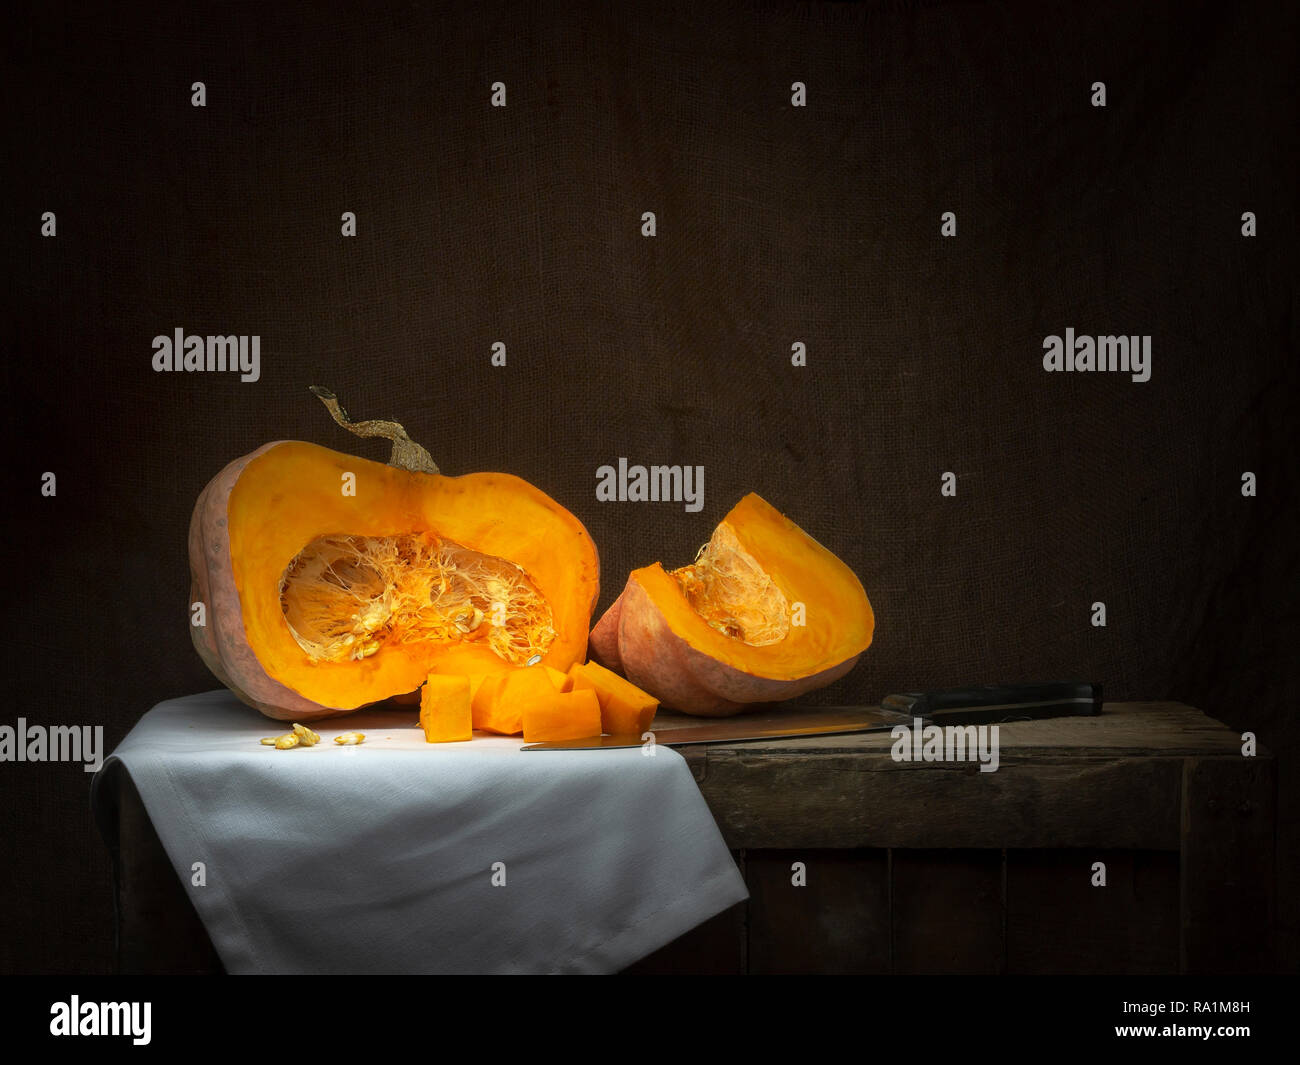 Acorn winter squash, pumpkin, prepared for cooking, cubes with seeds. LIfe and death metaphor. Chiaroscuro, baroque style light painting. Stock Photo